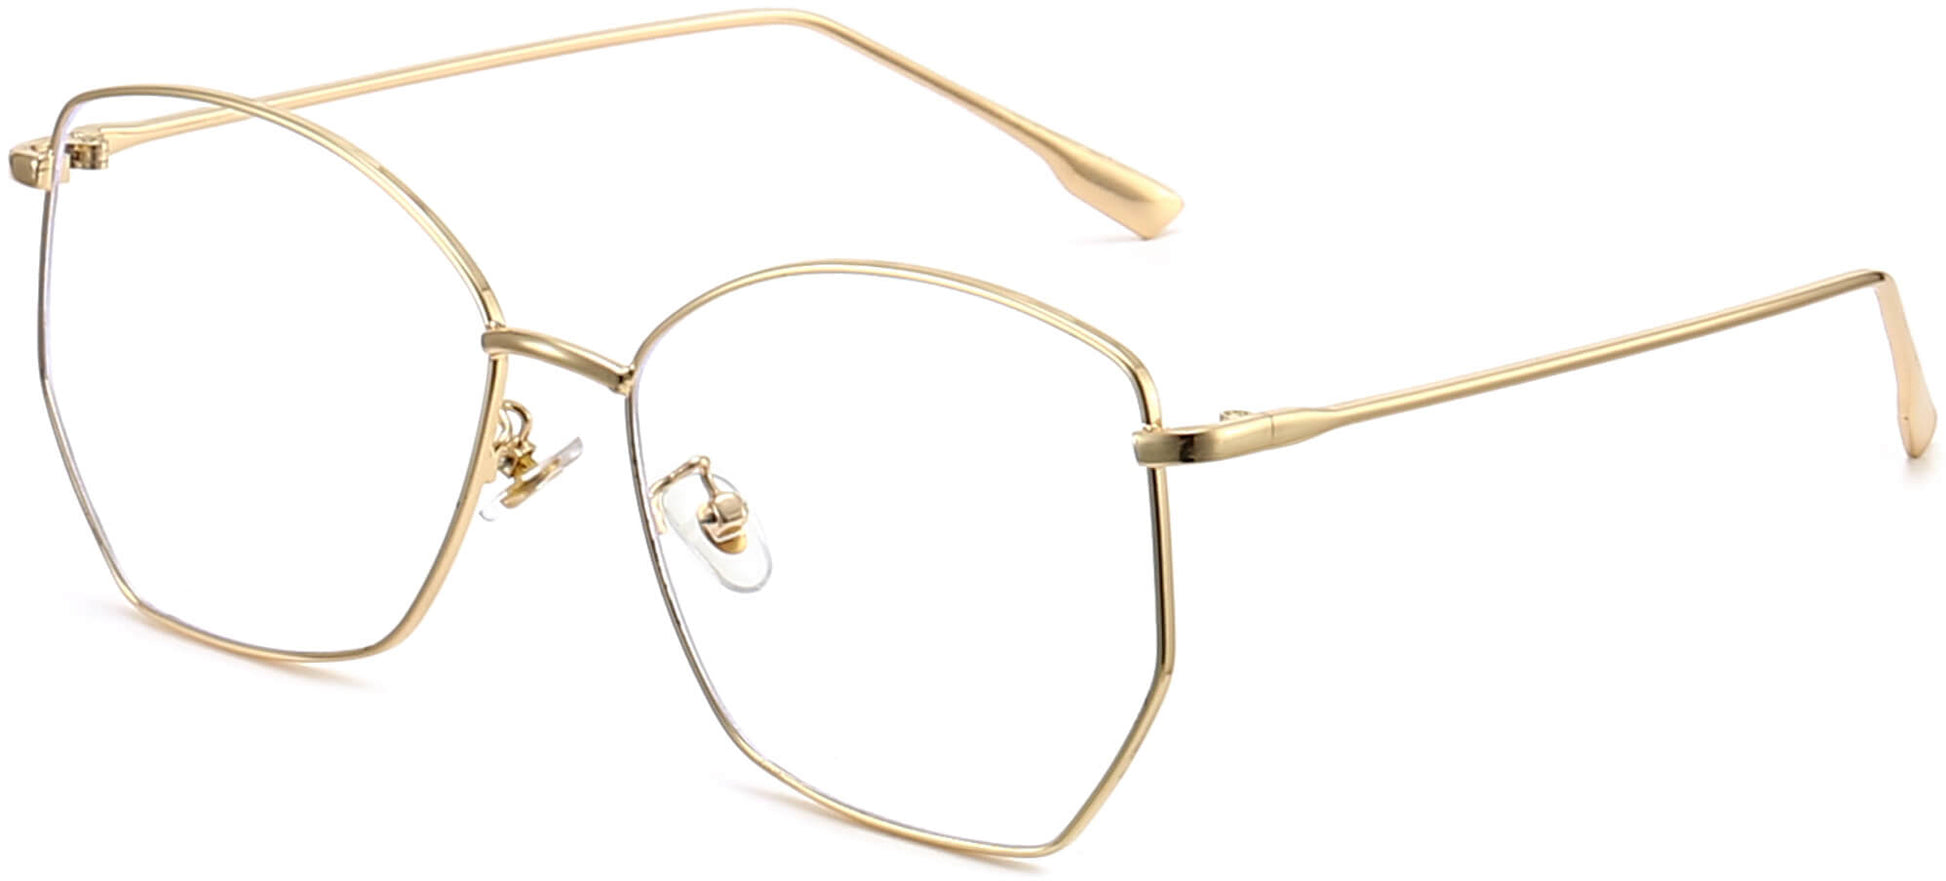 Maisie Geometric Gold Eyeglasses from ANRRI, angle view